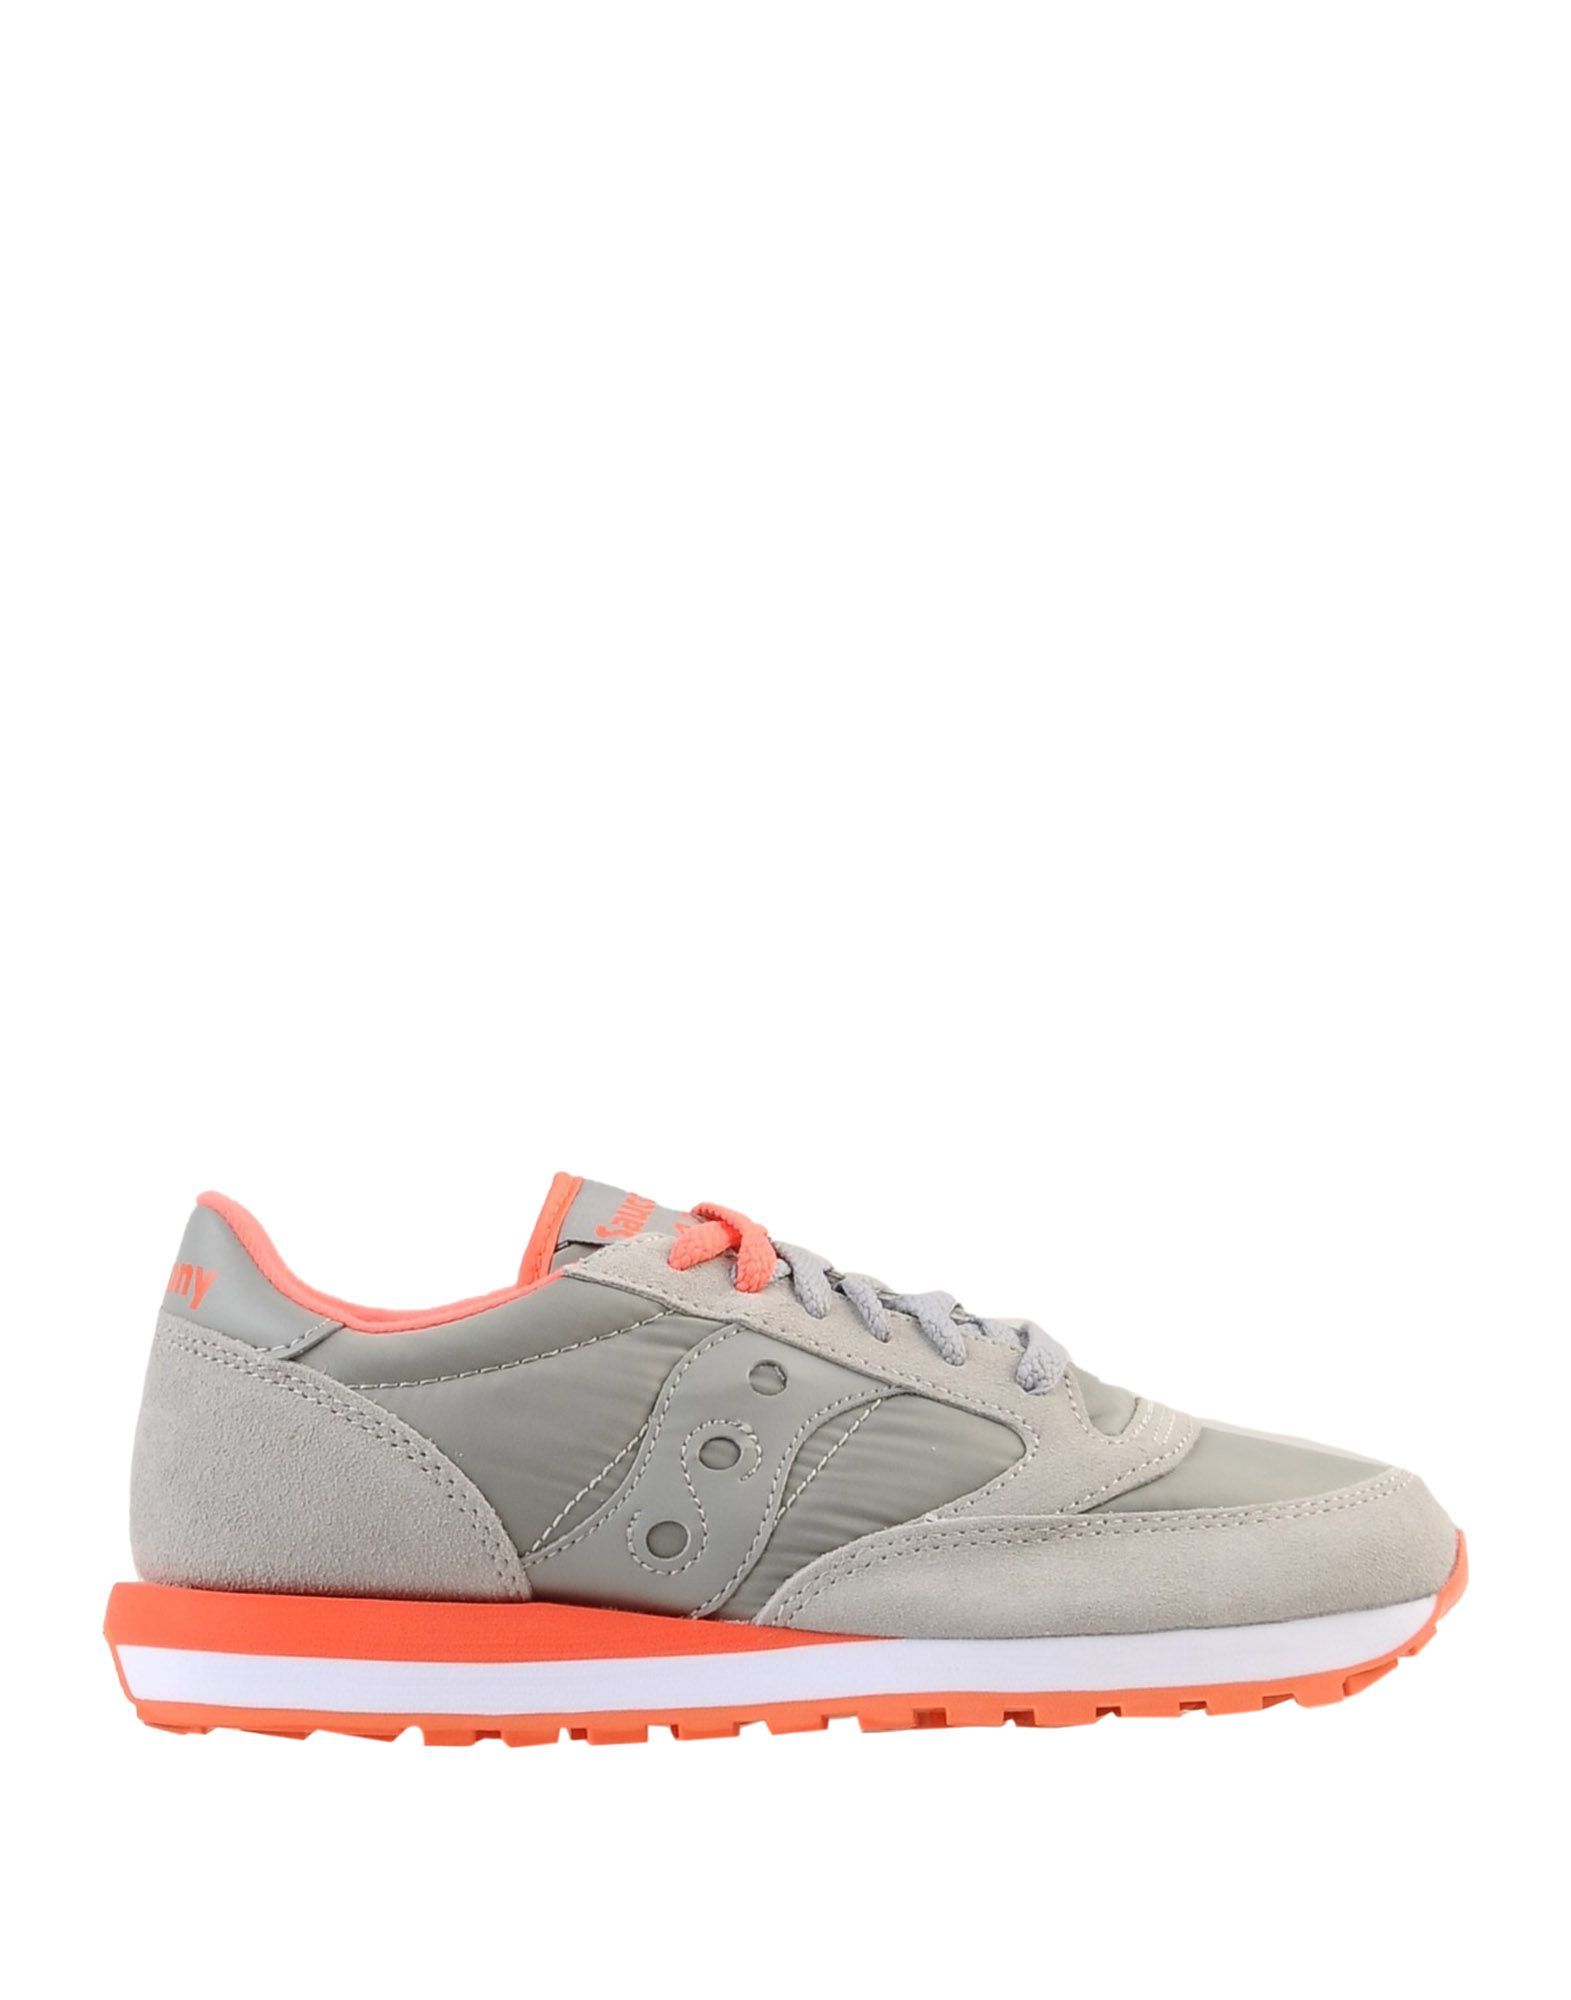 Saucony Grey Leather Sneakers